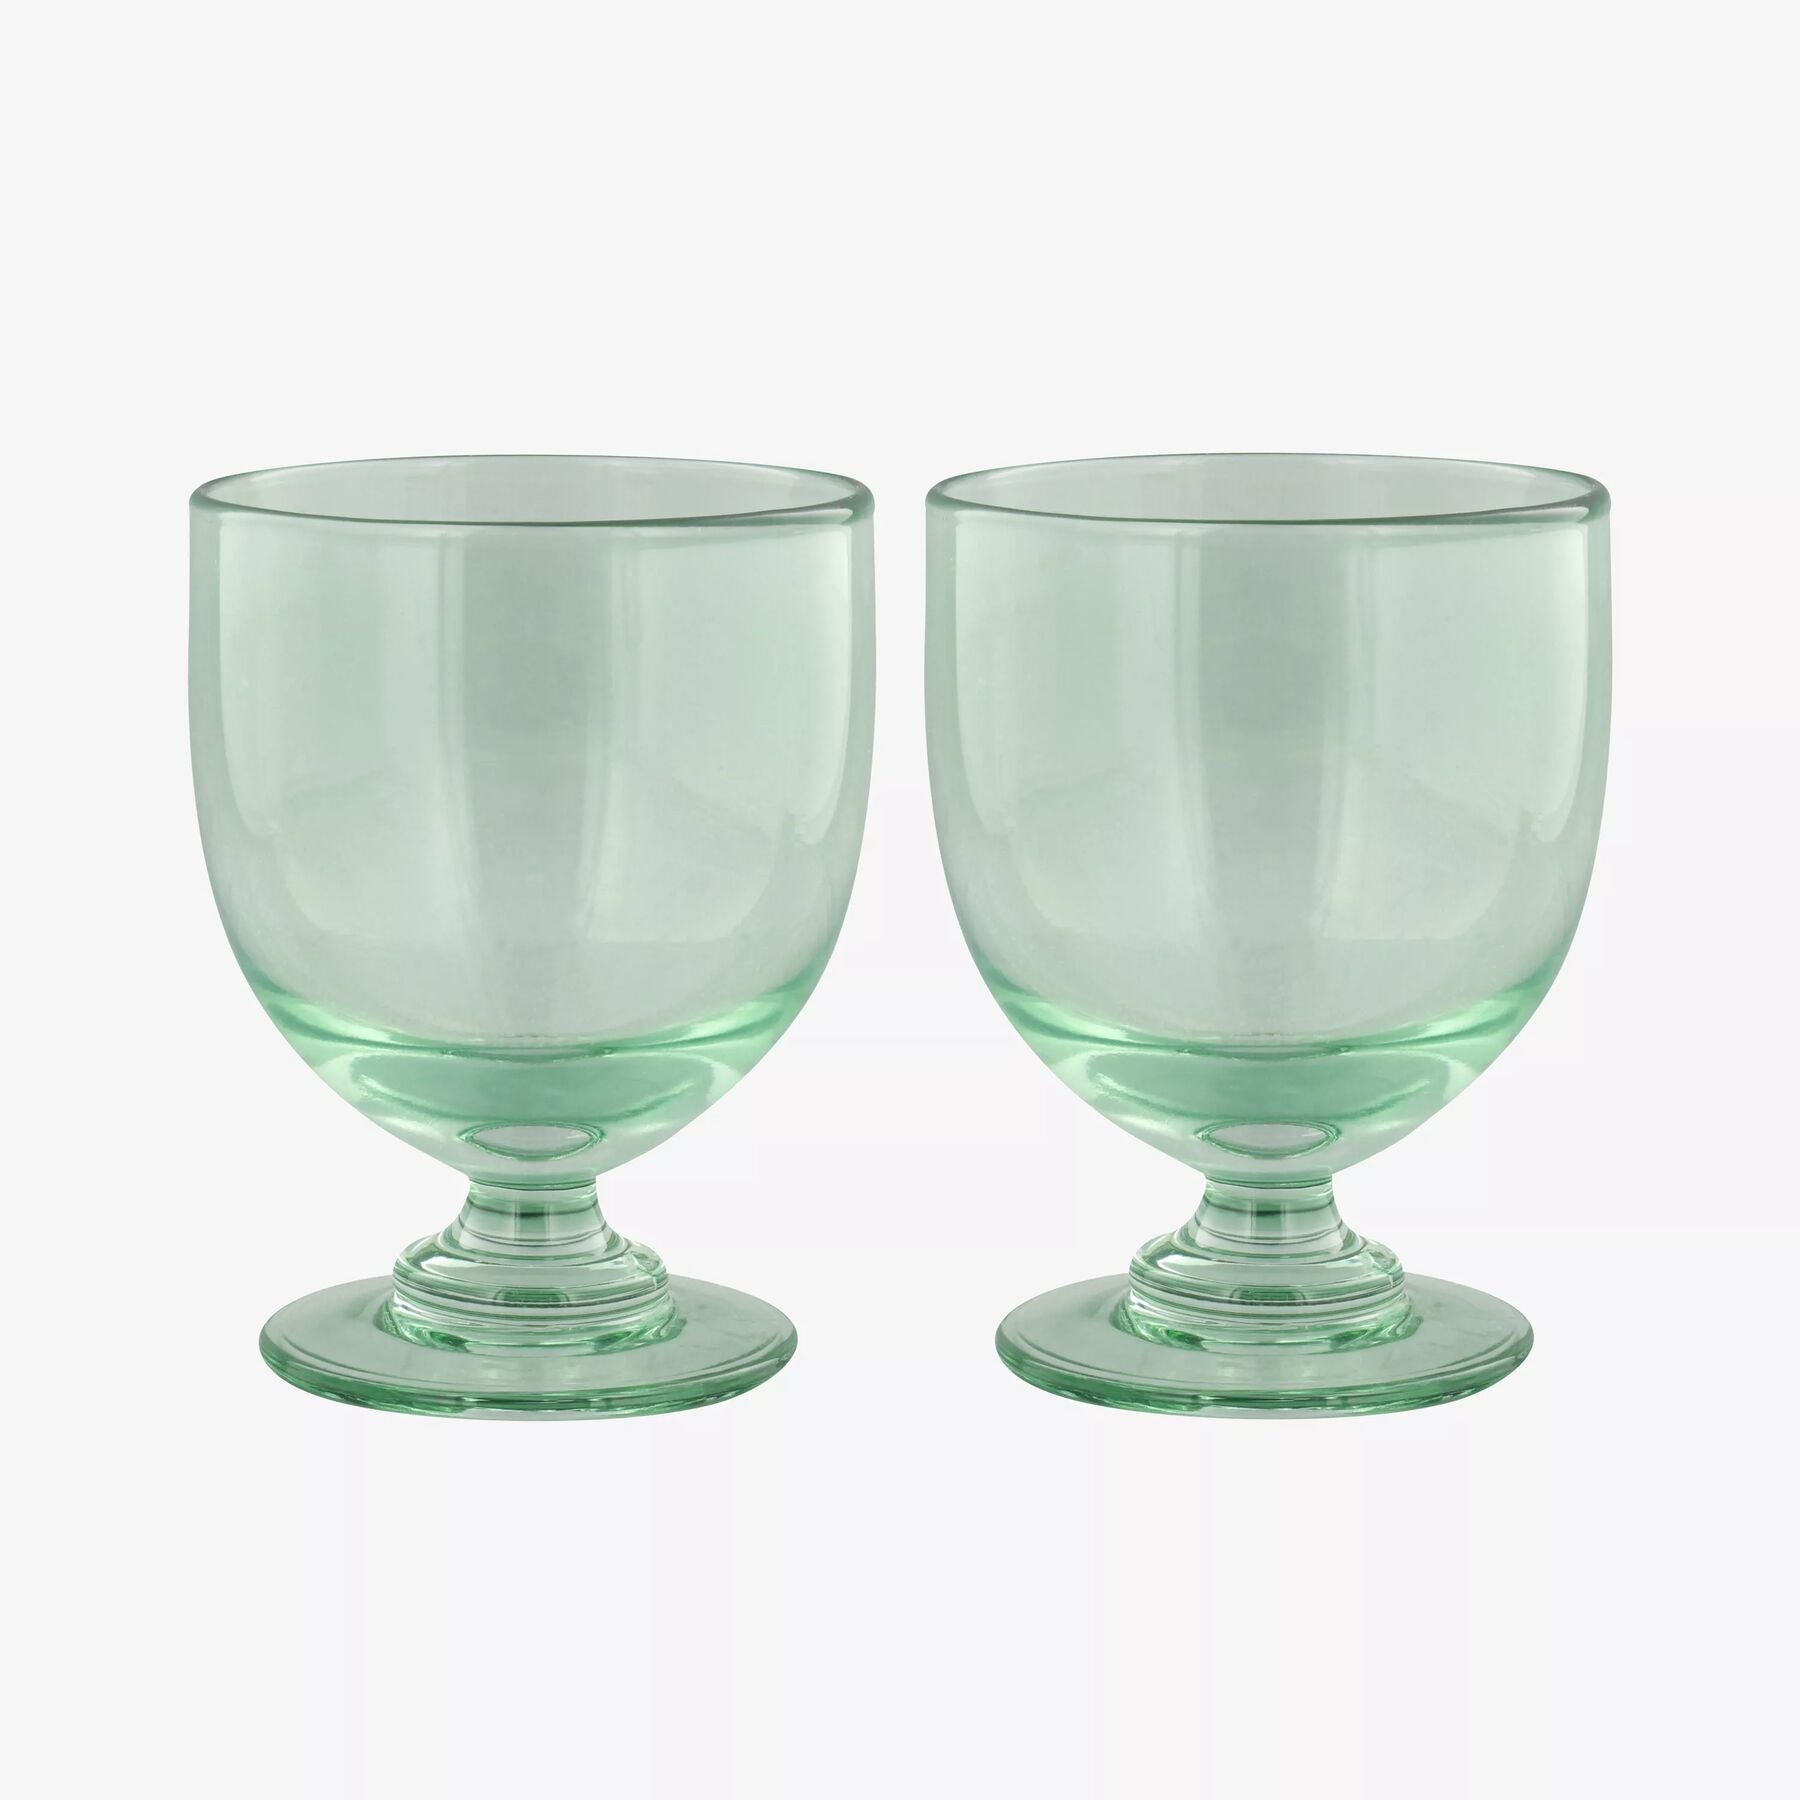 Goblet Wine Glasses - 100% Recycled Glass (Set of 2) - Unique Hand-Etched Piece  | Emma Bridgewater